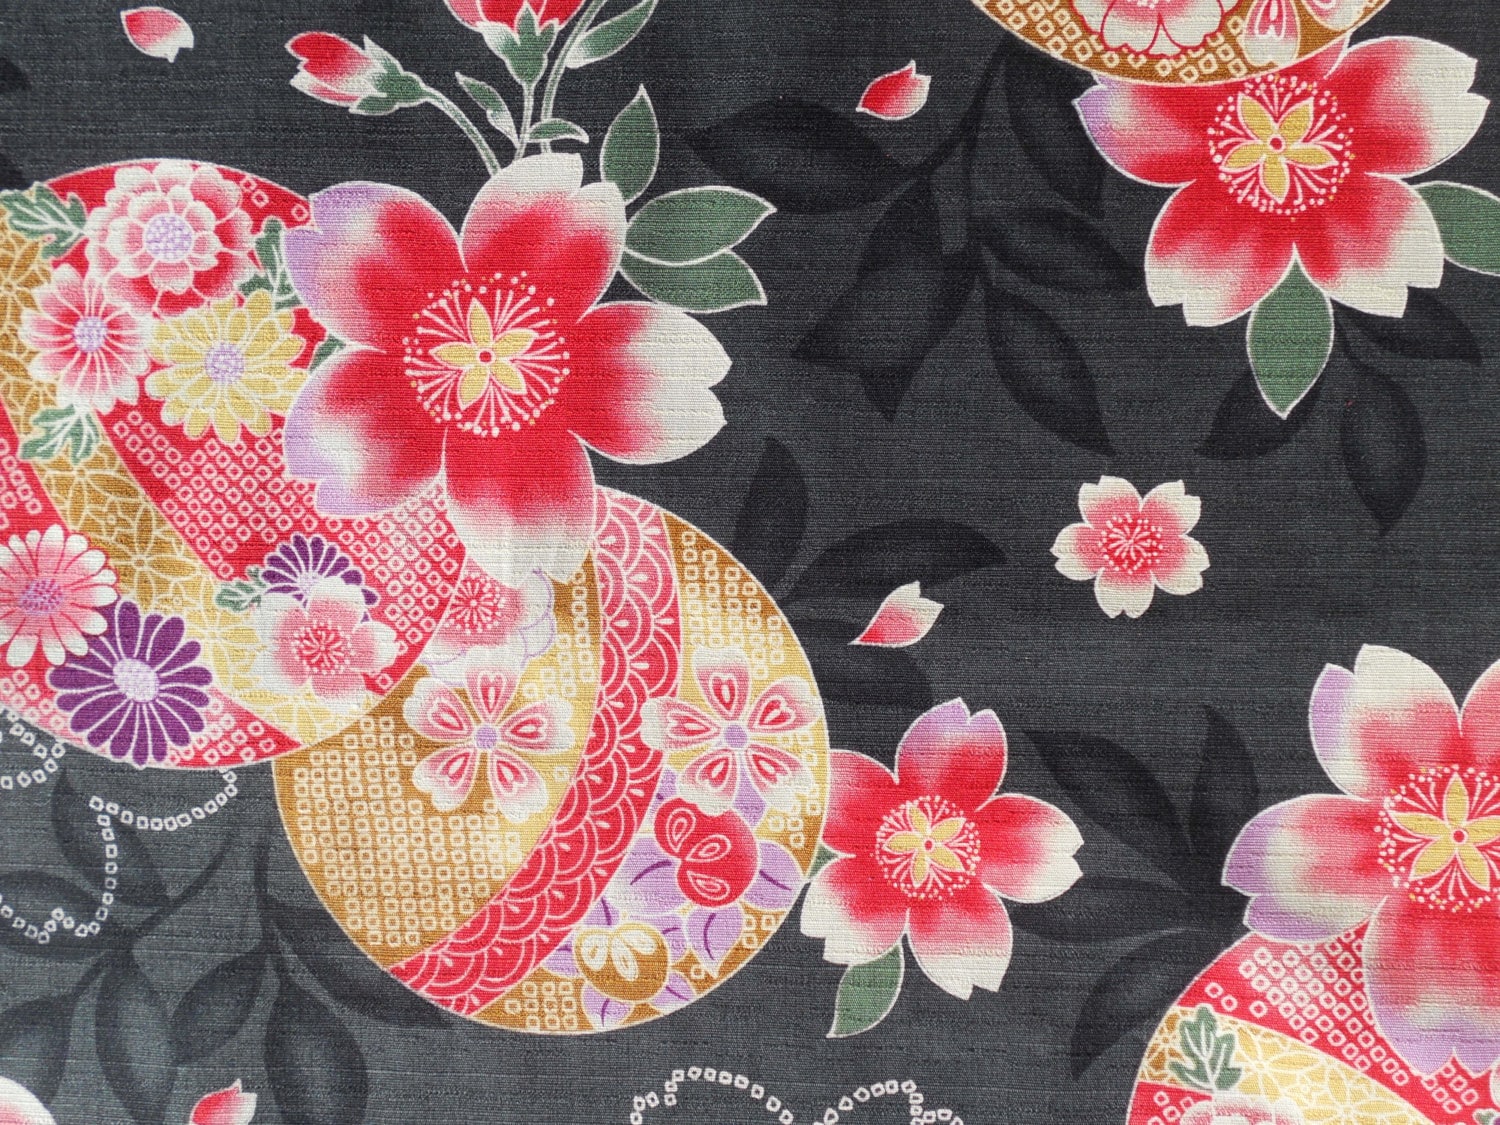 Floral. Ball. Japanese cotton fabric. Japanese fabric.